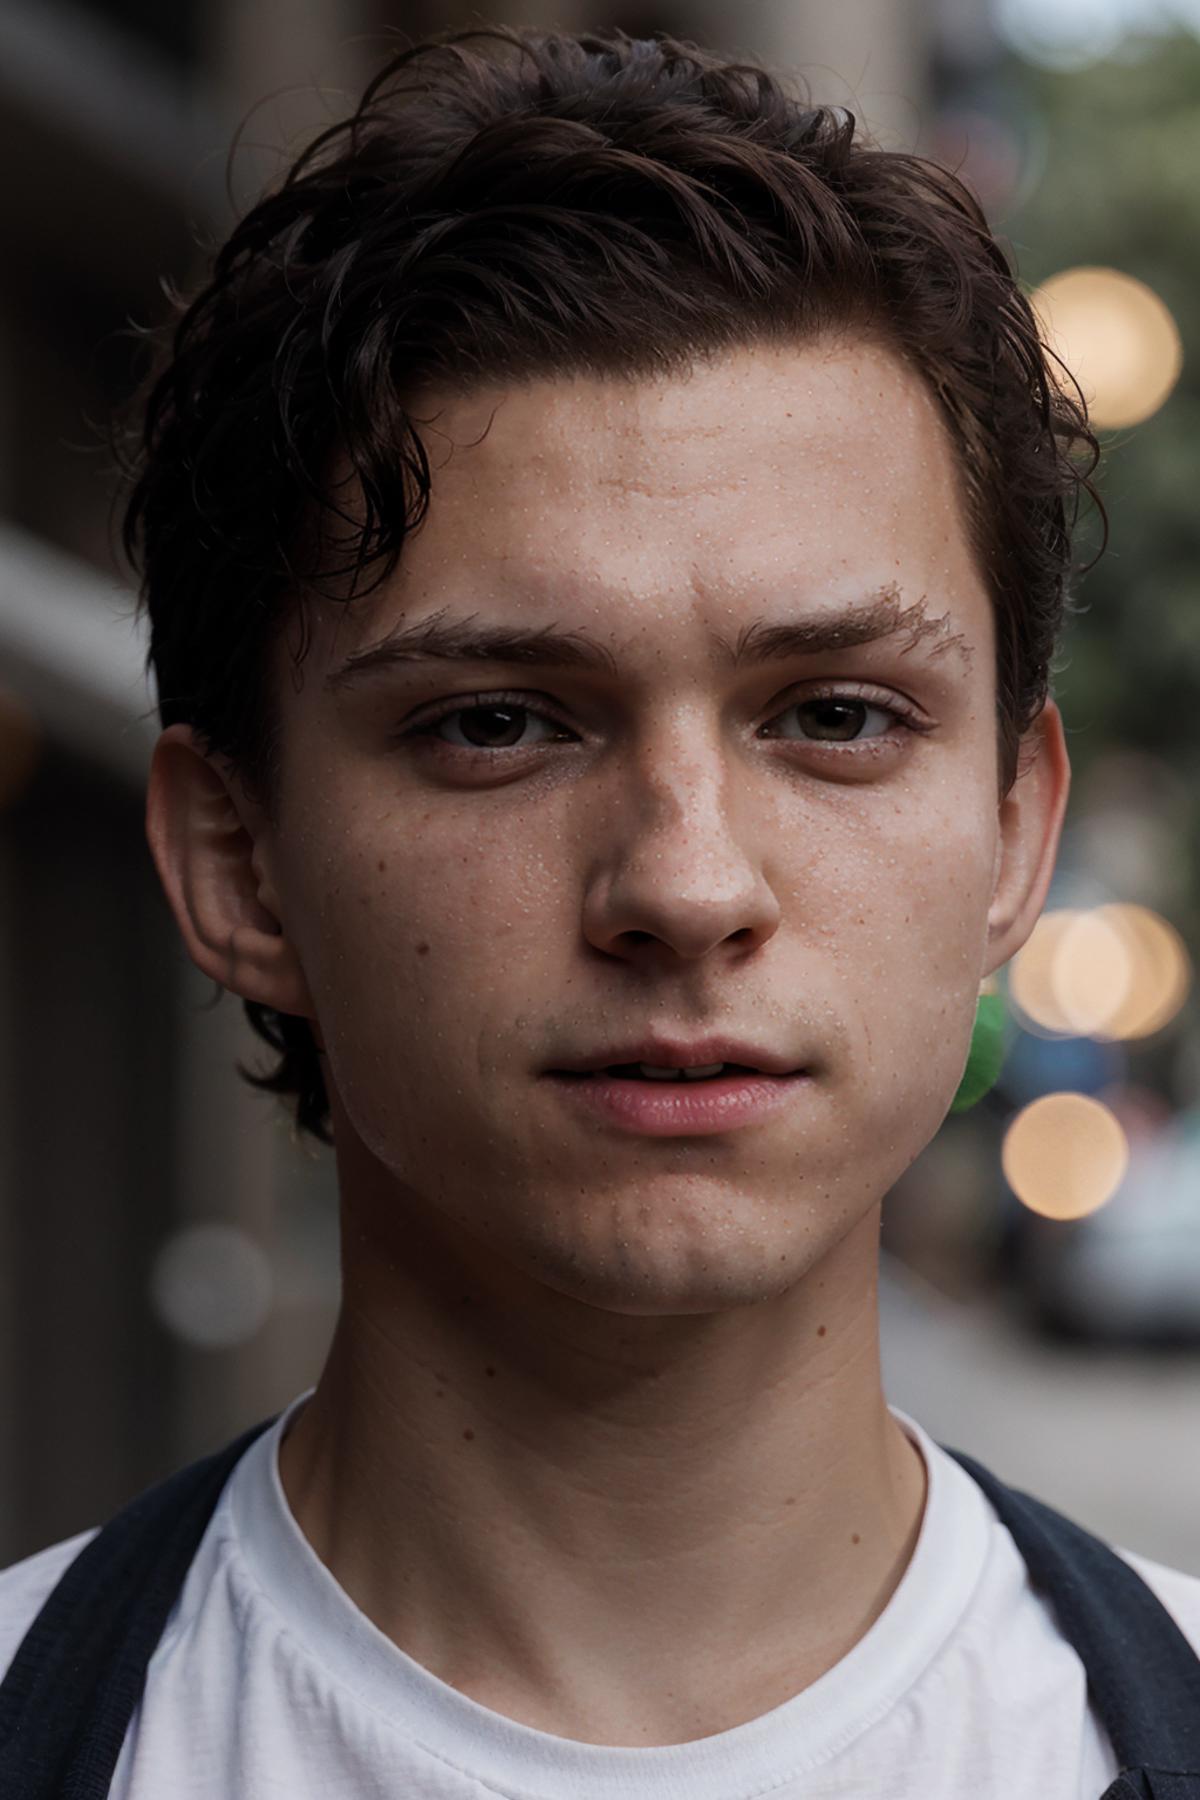 Tom Holland image by Looker